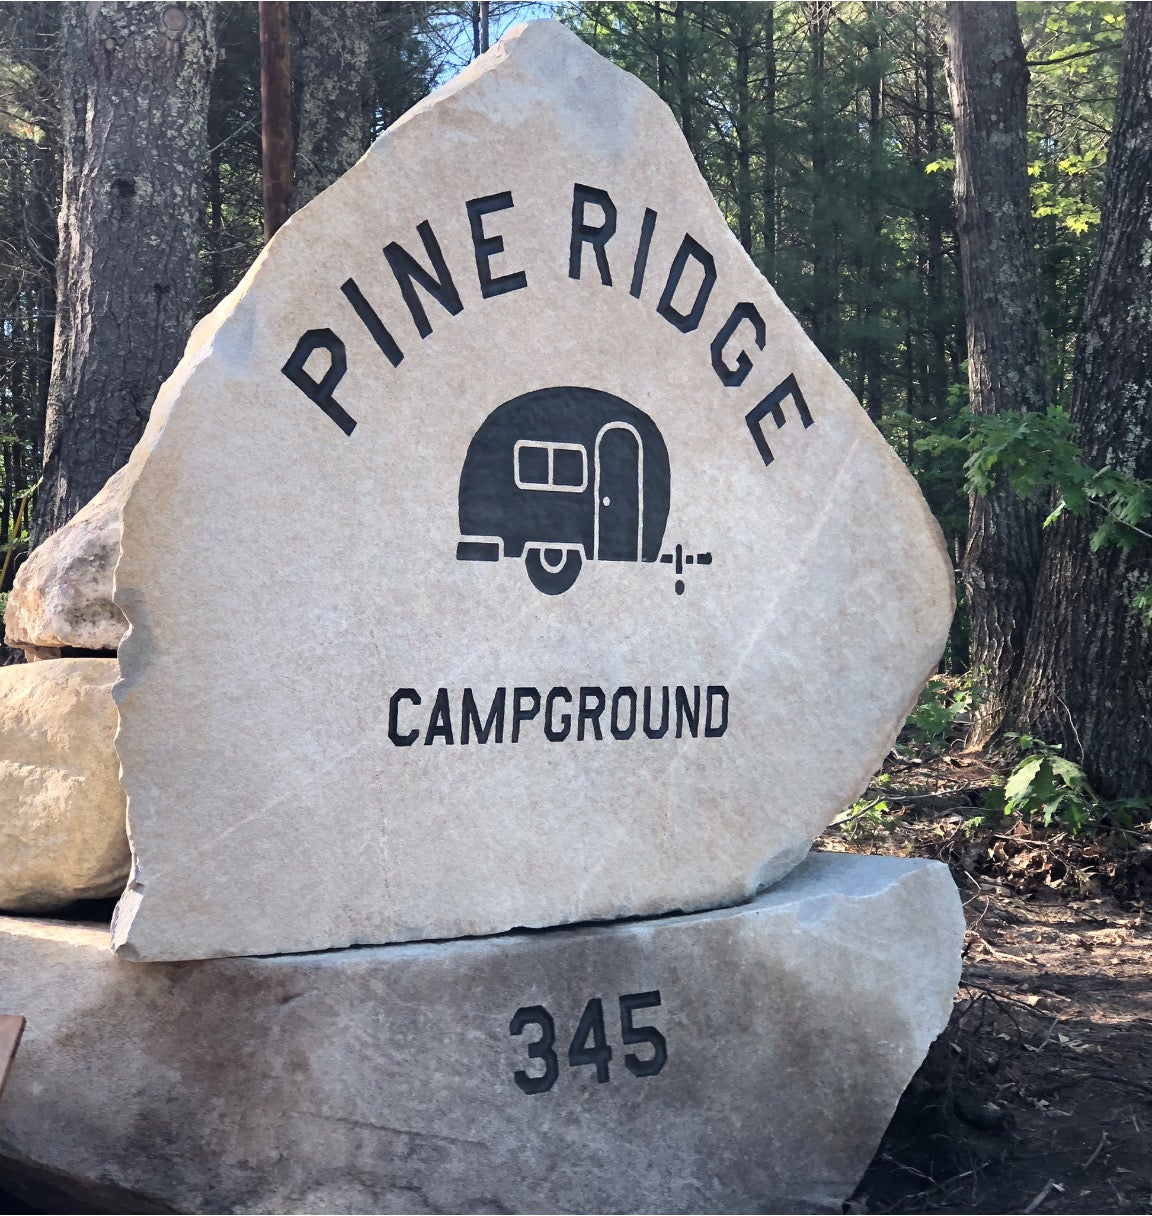 Camper submitted image from Pine Ridge Campground - 1